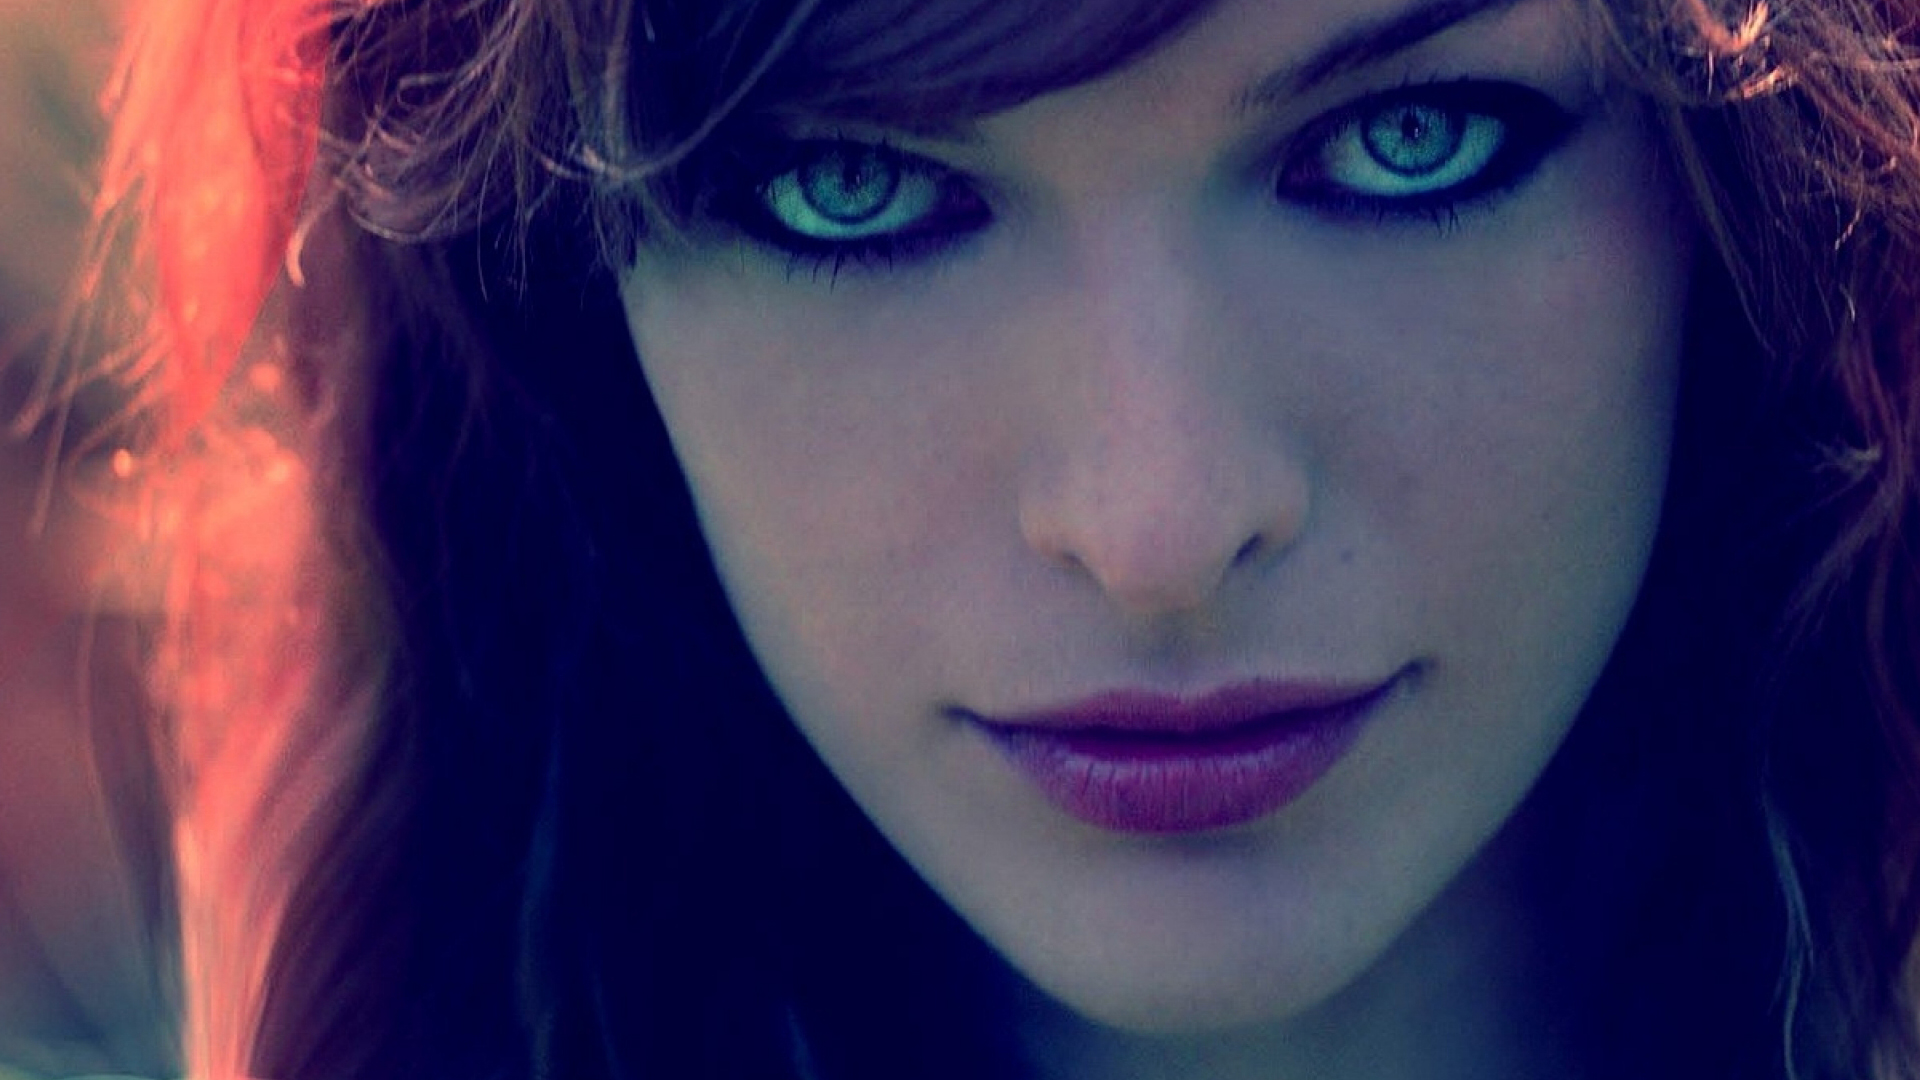 Milla Jovovich Wallpaper And Pictures To